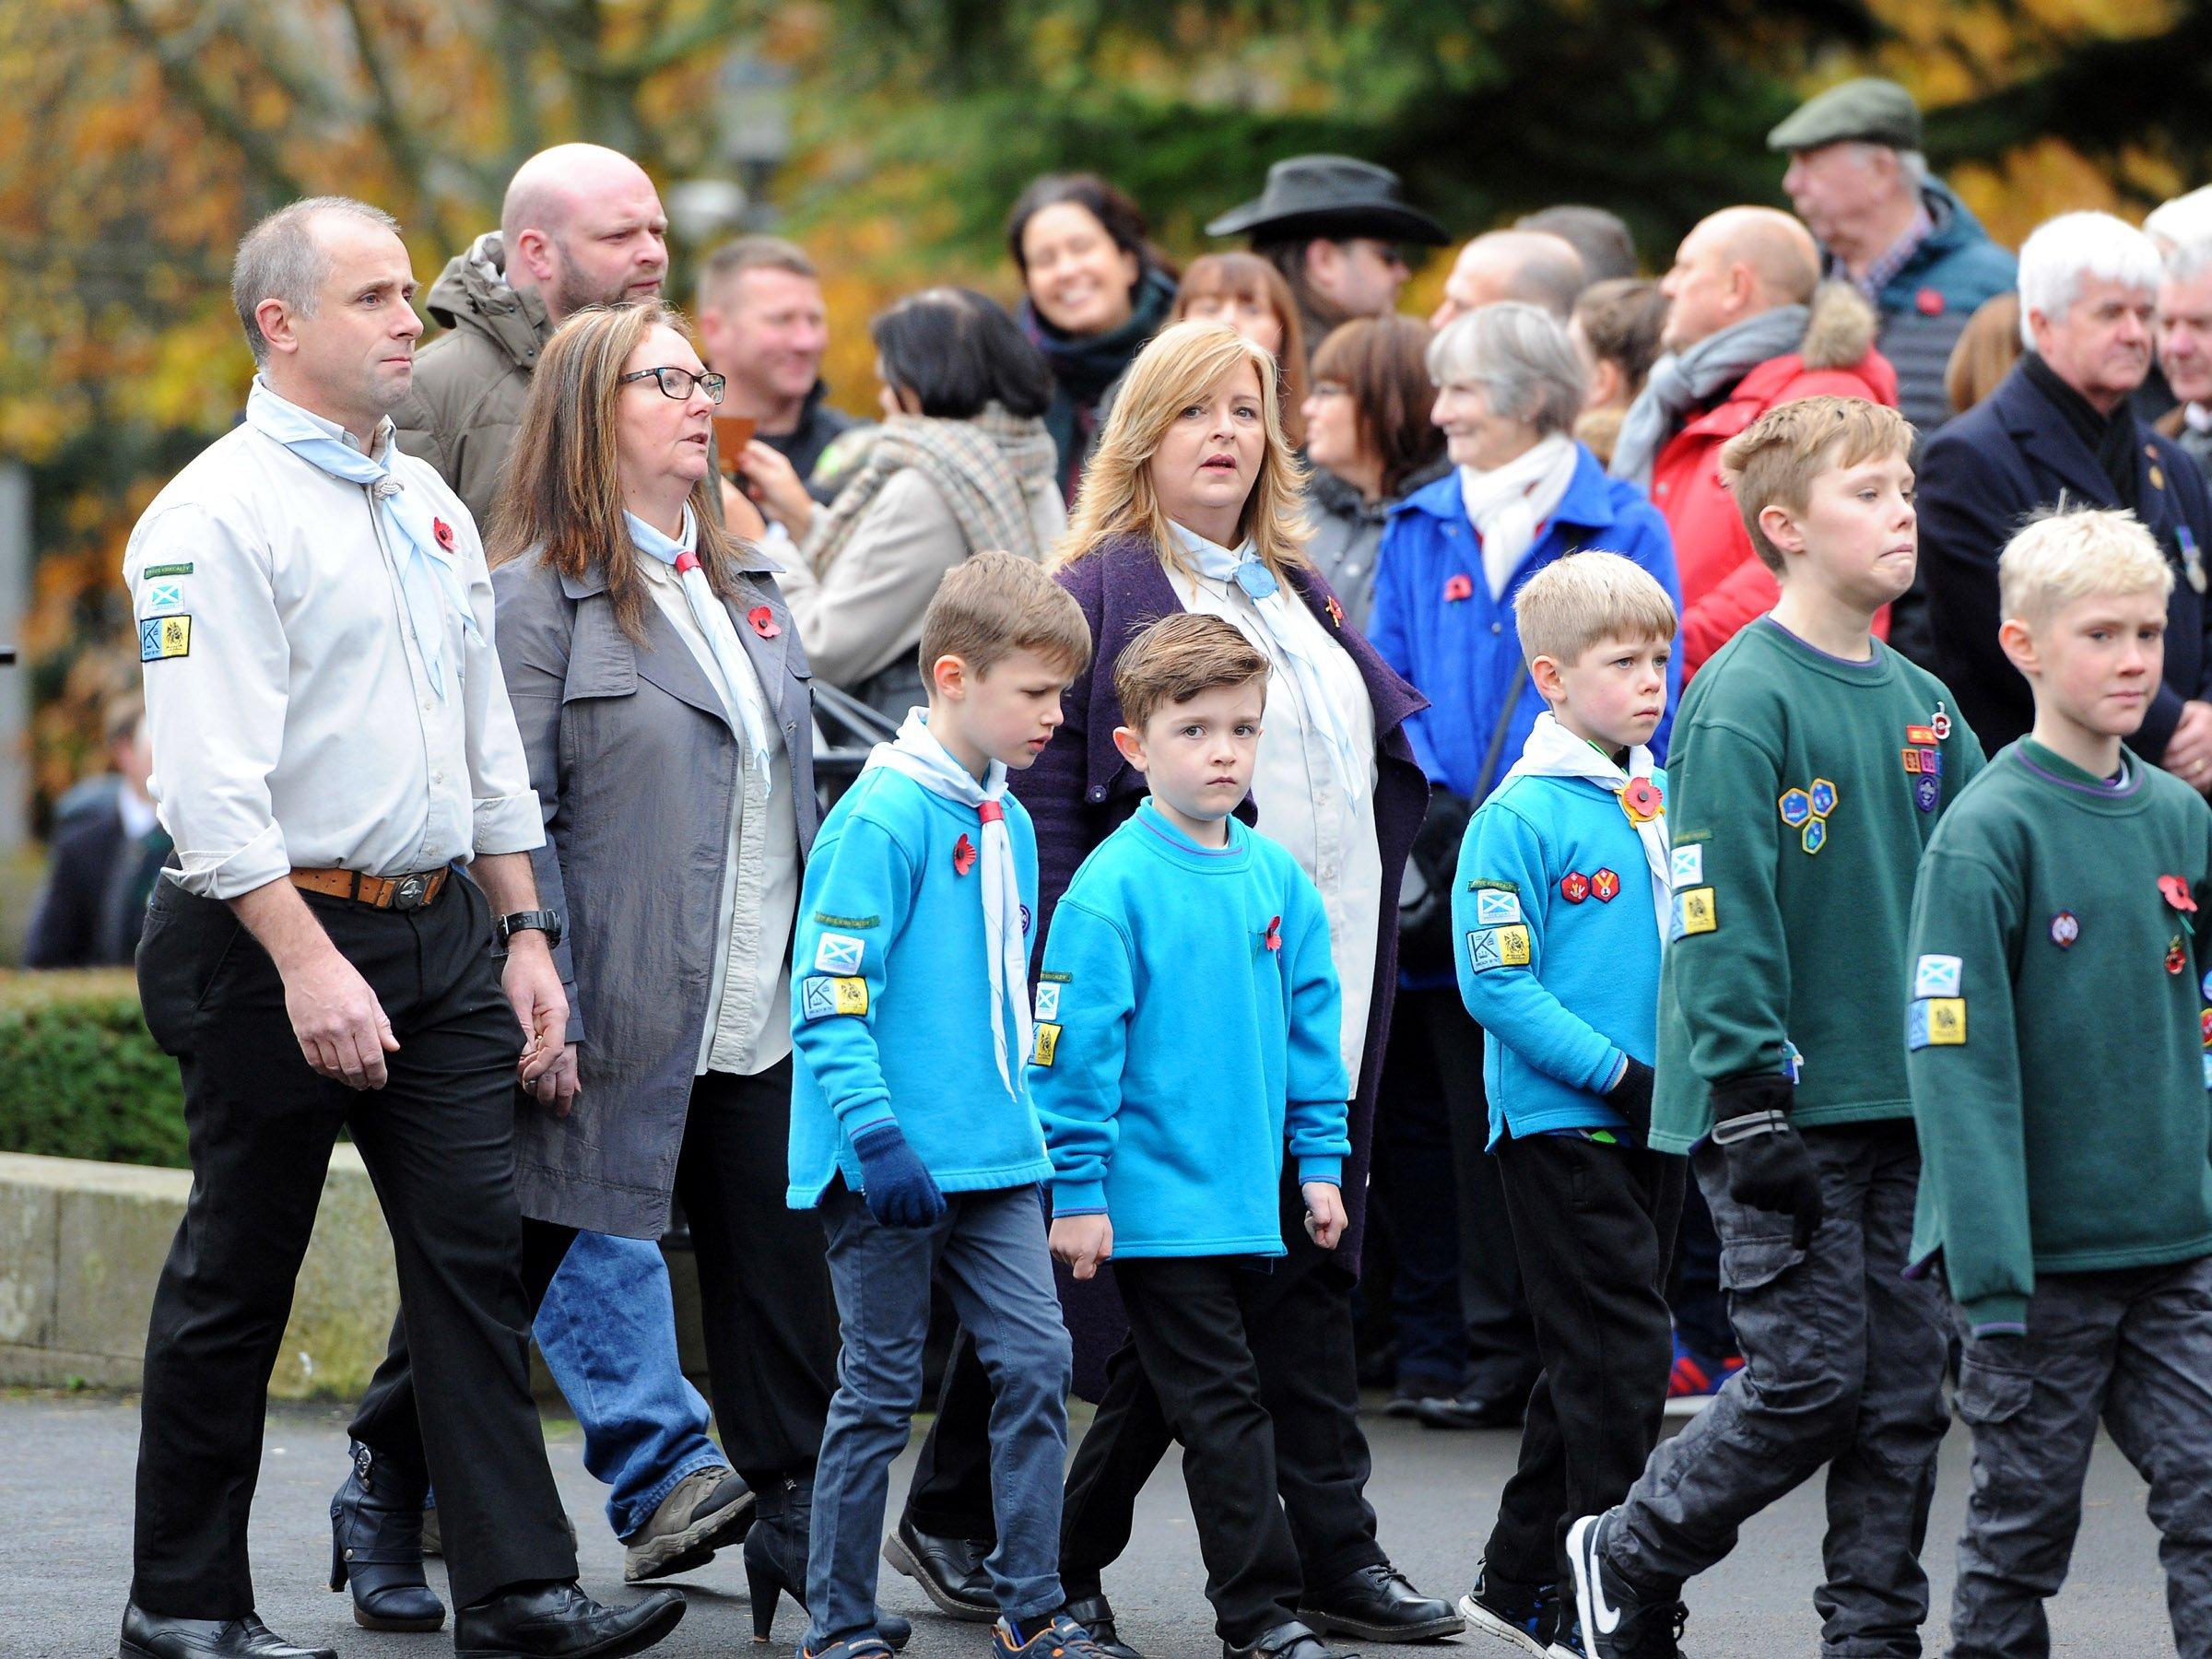 Remembrance Sunday Service, Memorial Gardens, Kirkcaldy. Picture by Walter Neilson/Fife Photo Agency.